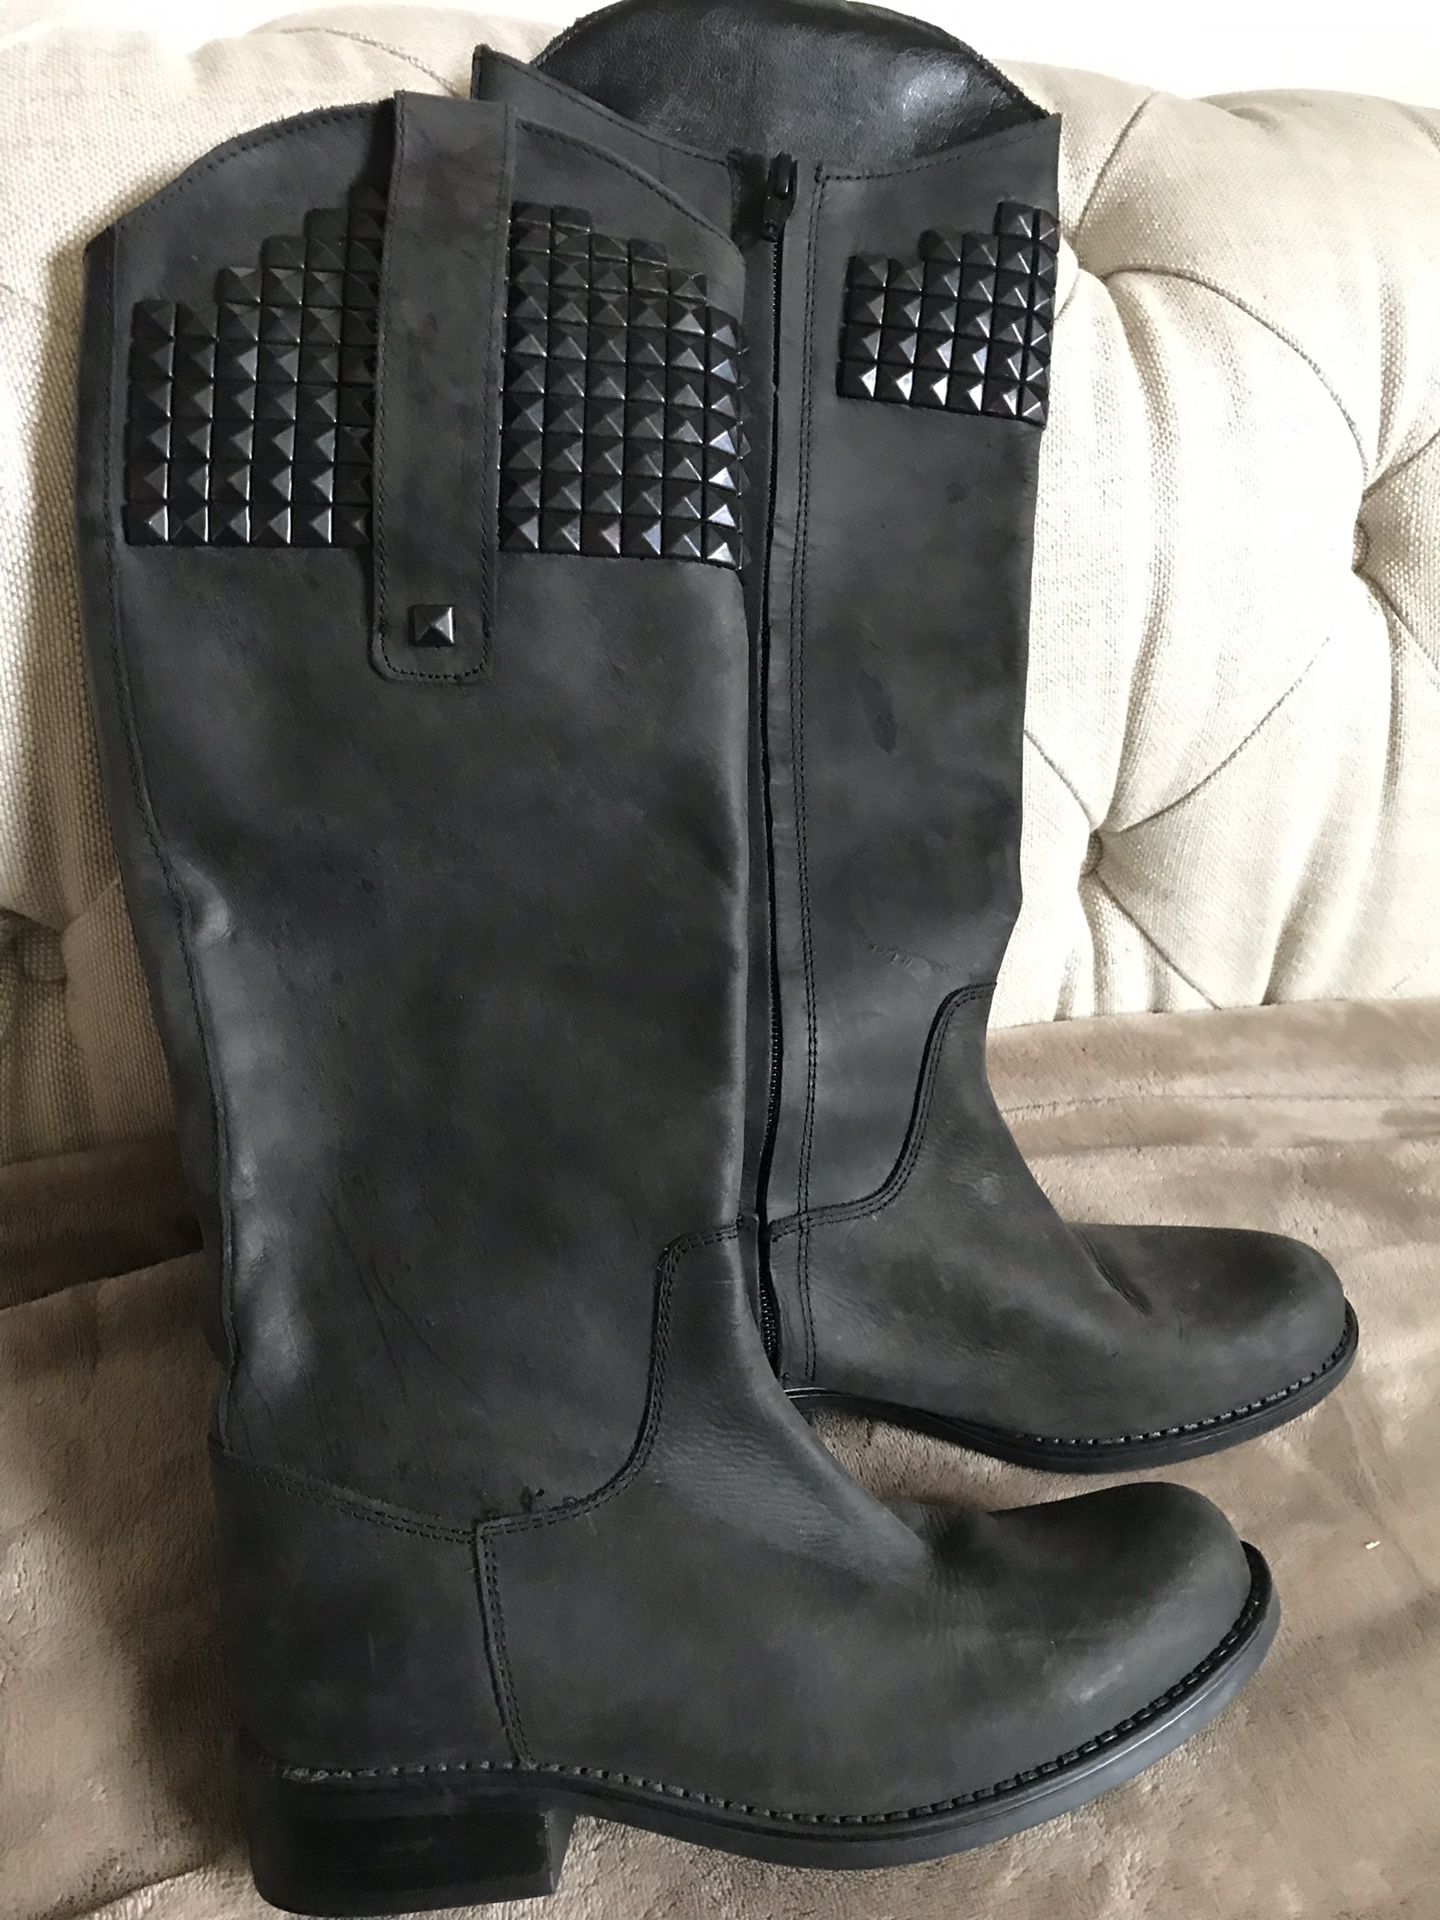 Steve Madden leather boots 6 1/2 worn once